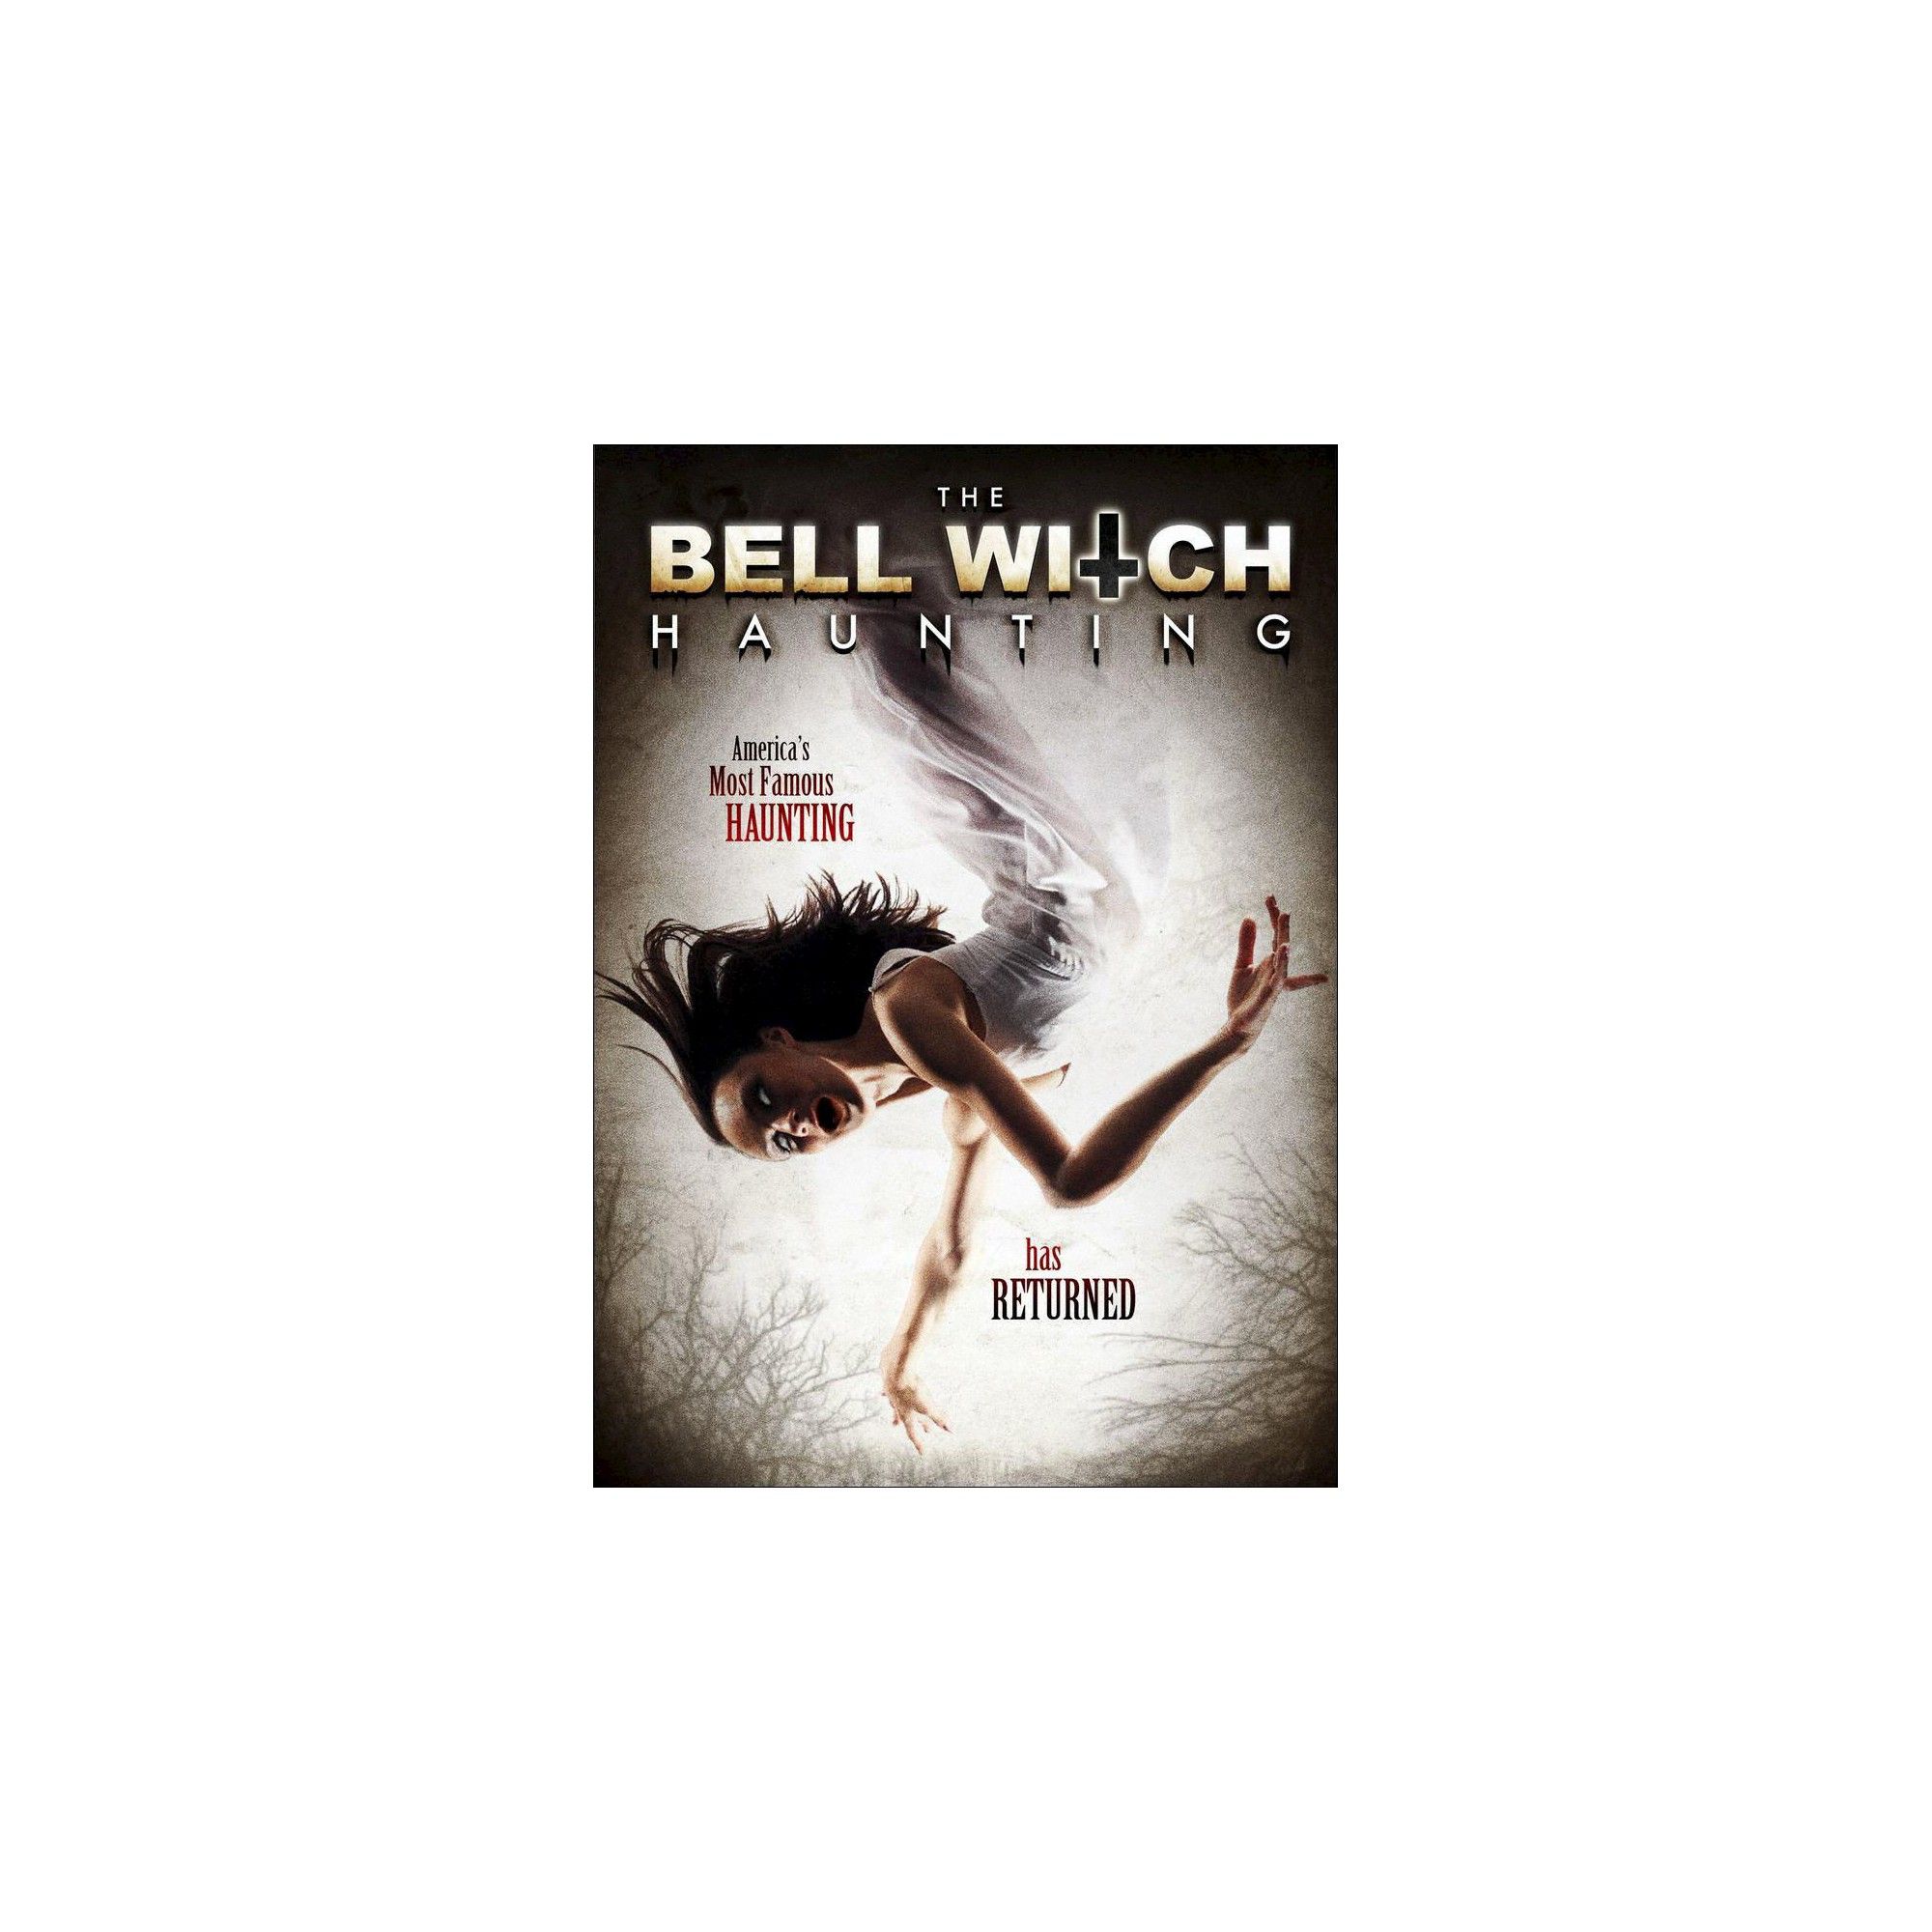 Bell witch haunting (Dvd) | Bell witch and Products